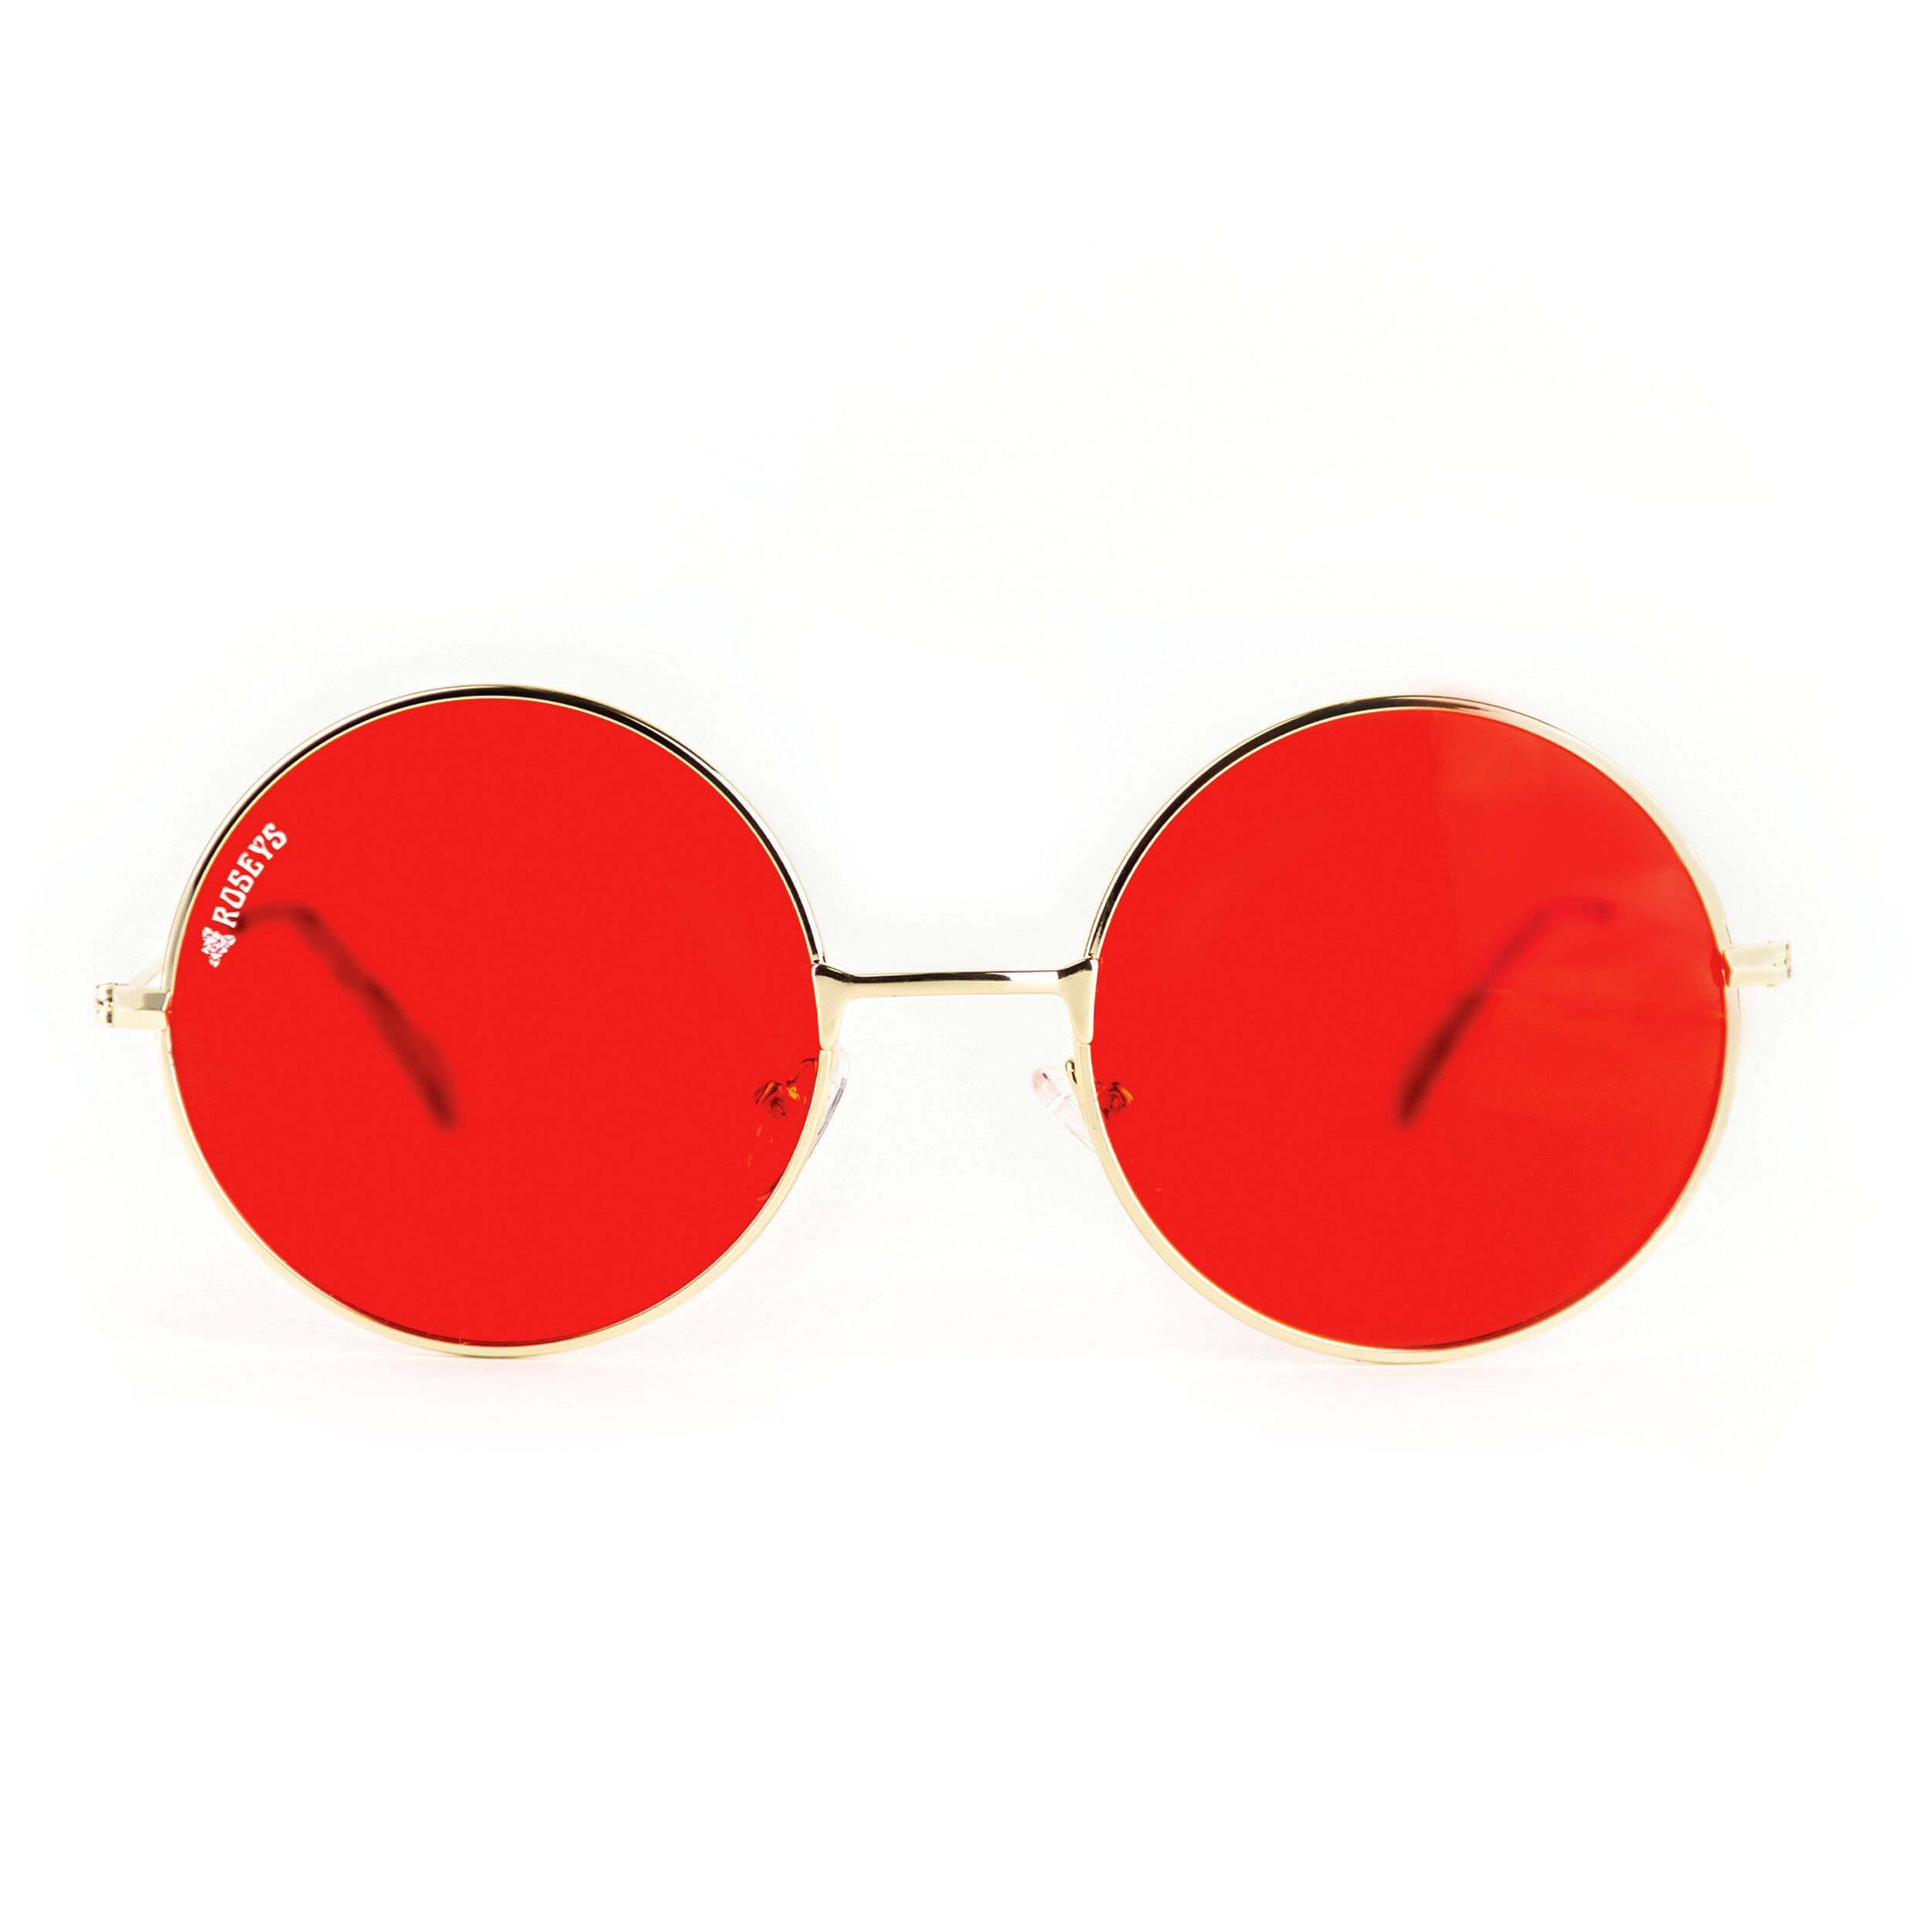 Red Sunglasses: Smart, Sassy and Stylish - All About Vision